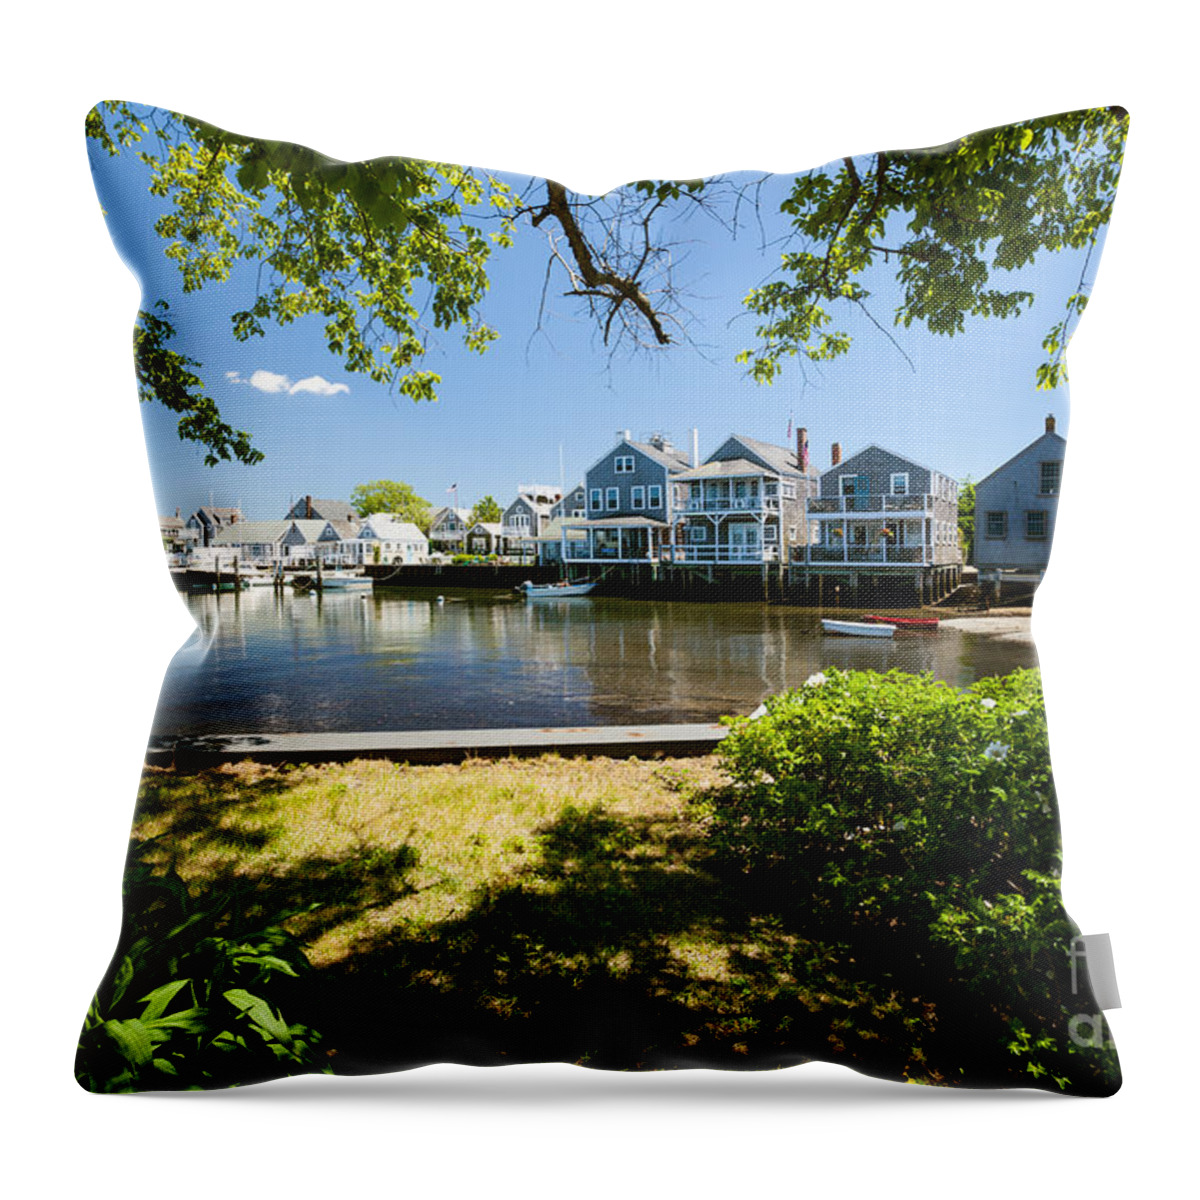 Nantucket Homes By The Sea Throw Pillow featuring the photograph Nantucket Homes By the Sea by Michelle Constantine